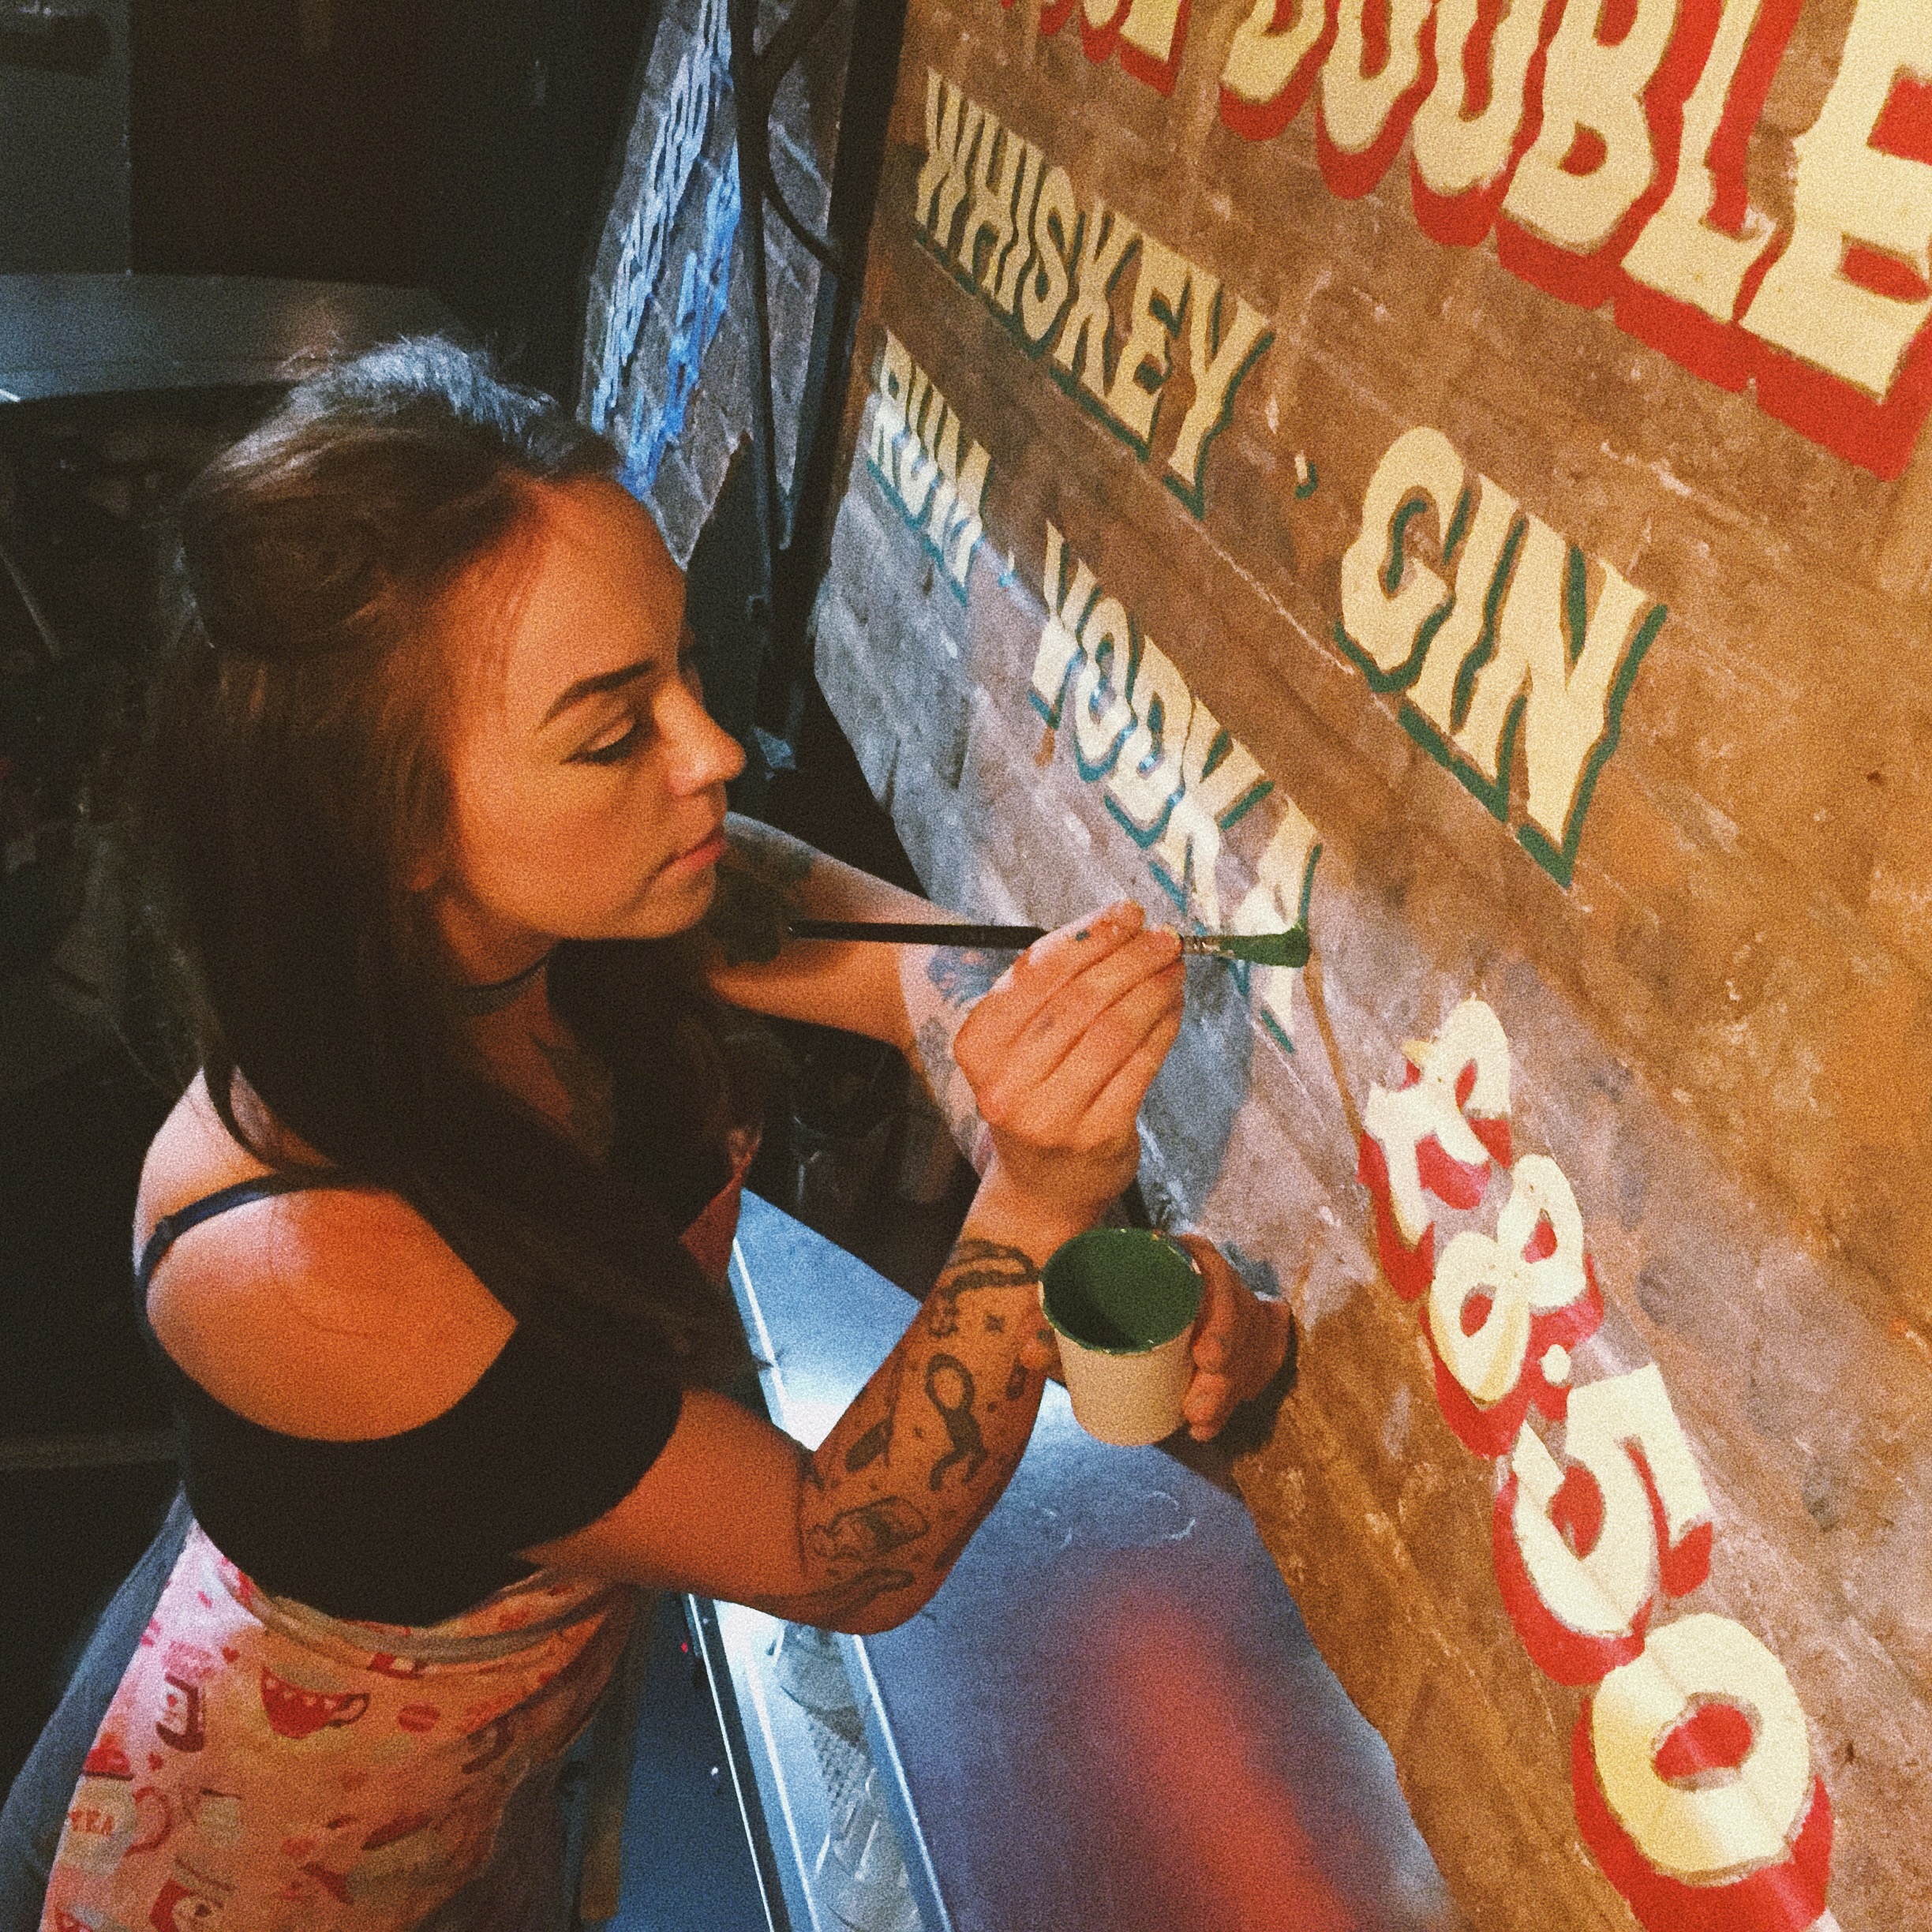 Female sign writer hand painting retro style signs on rough brick.